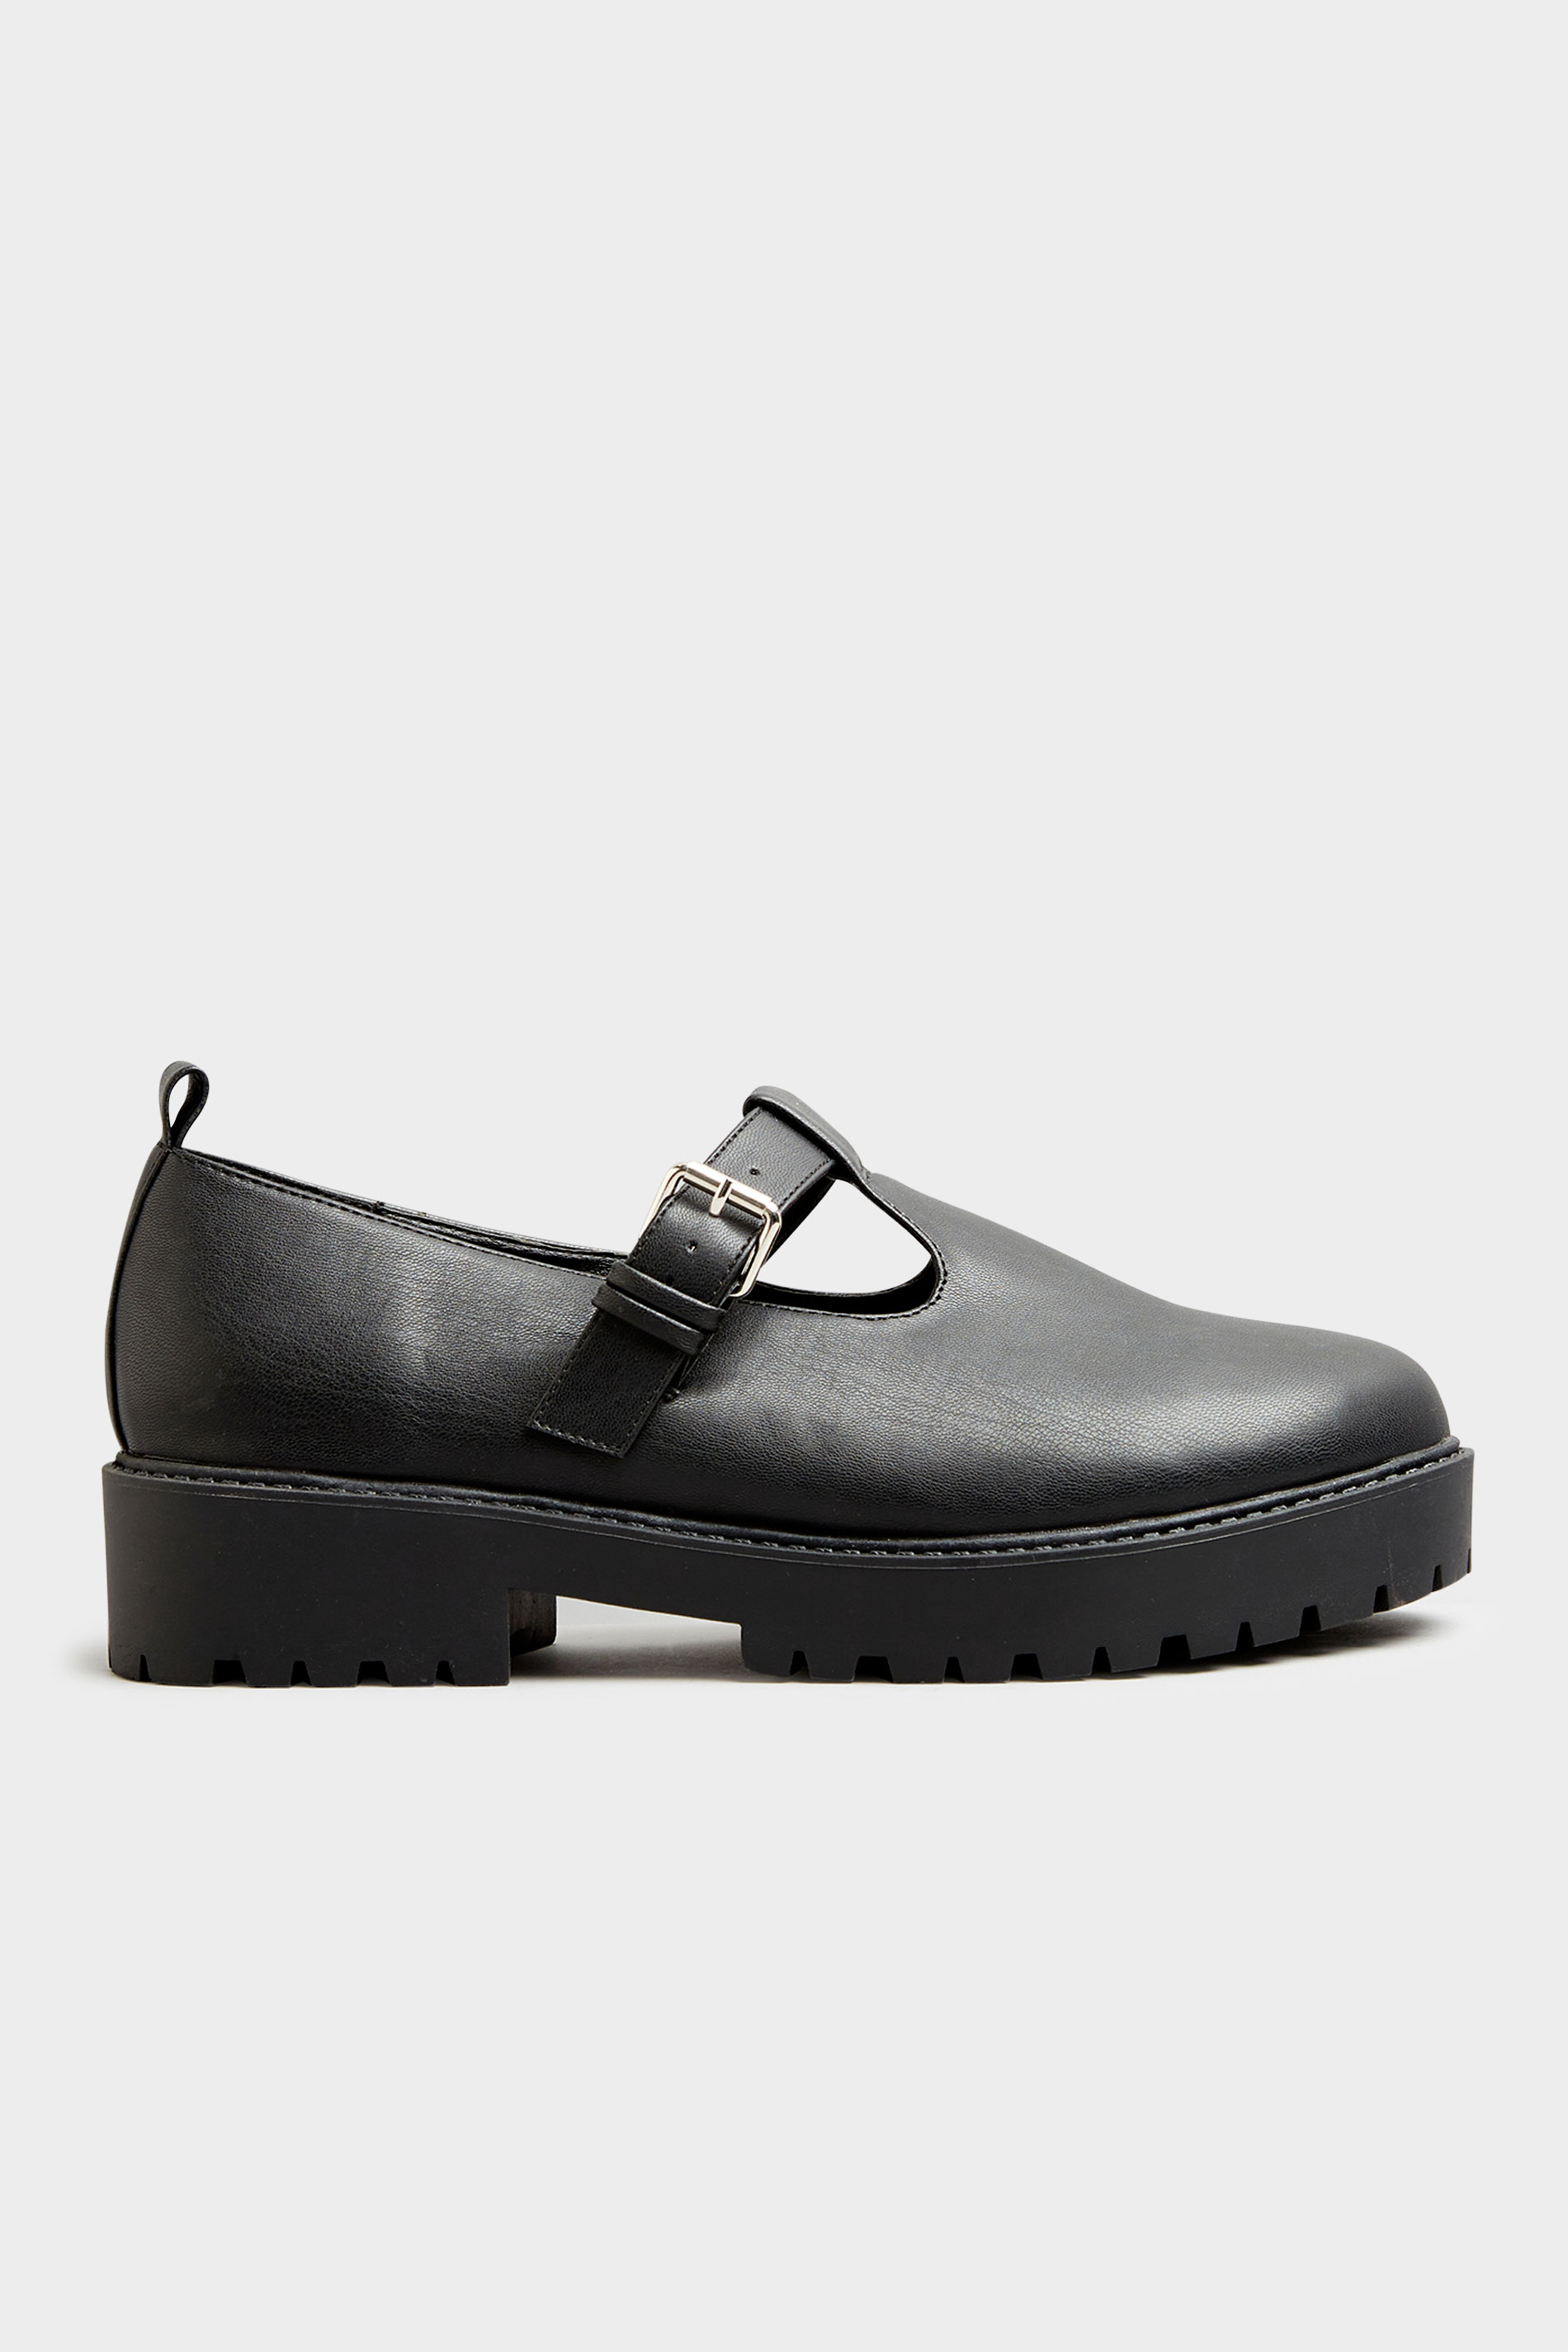 Plus Size LIMITED COLLECTION Black Mary Janes In Extra Wide Fit | Long ...